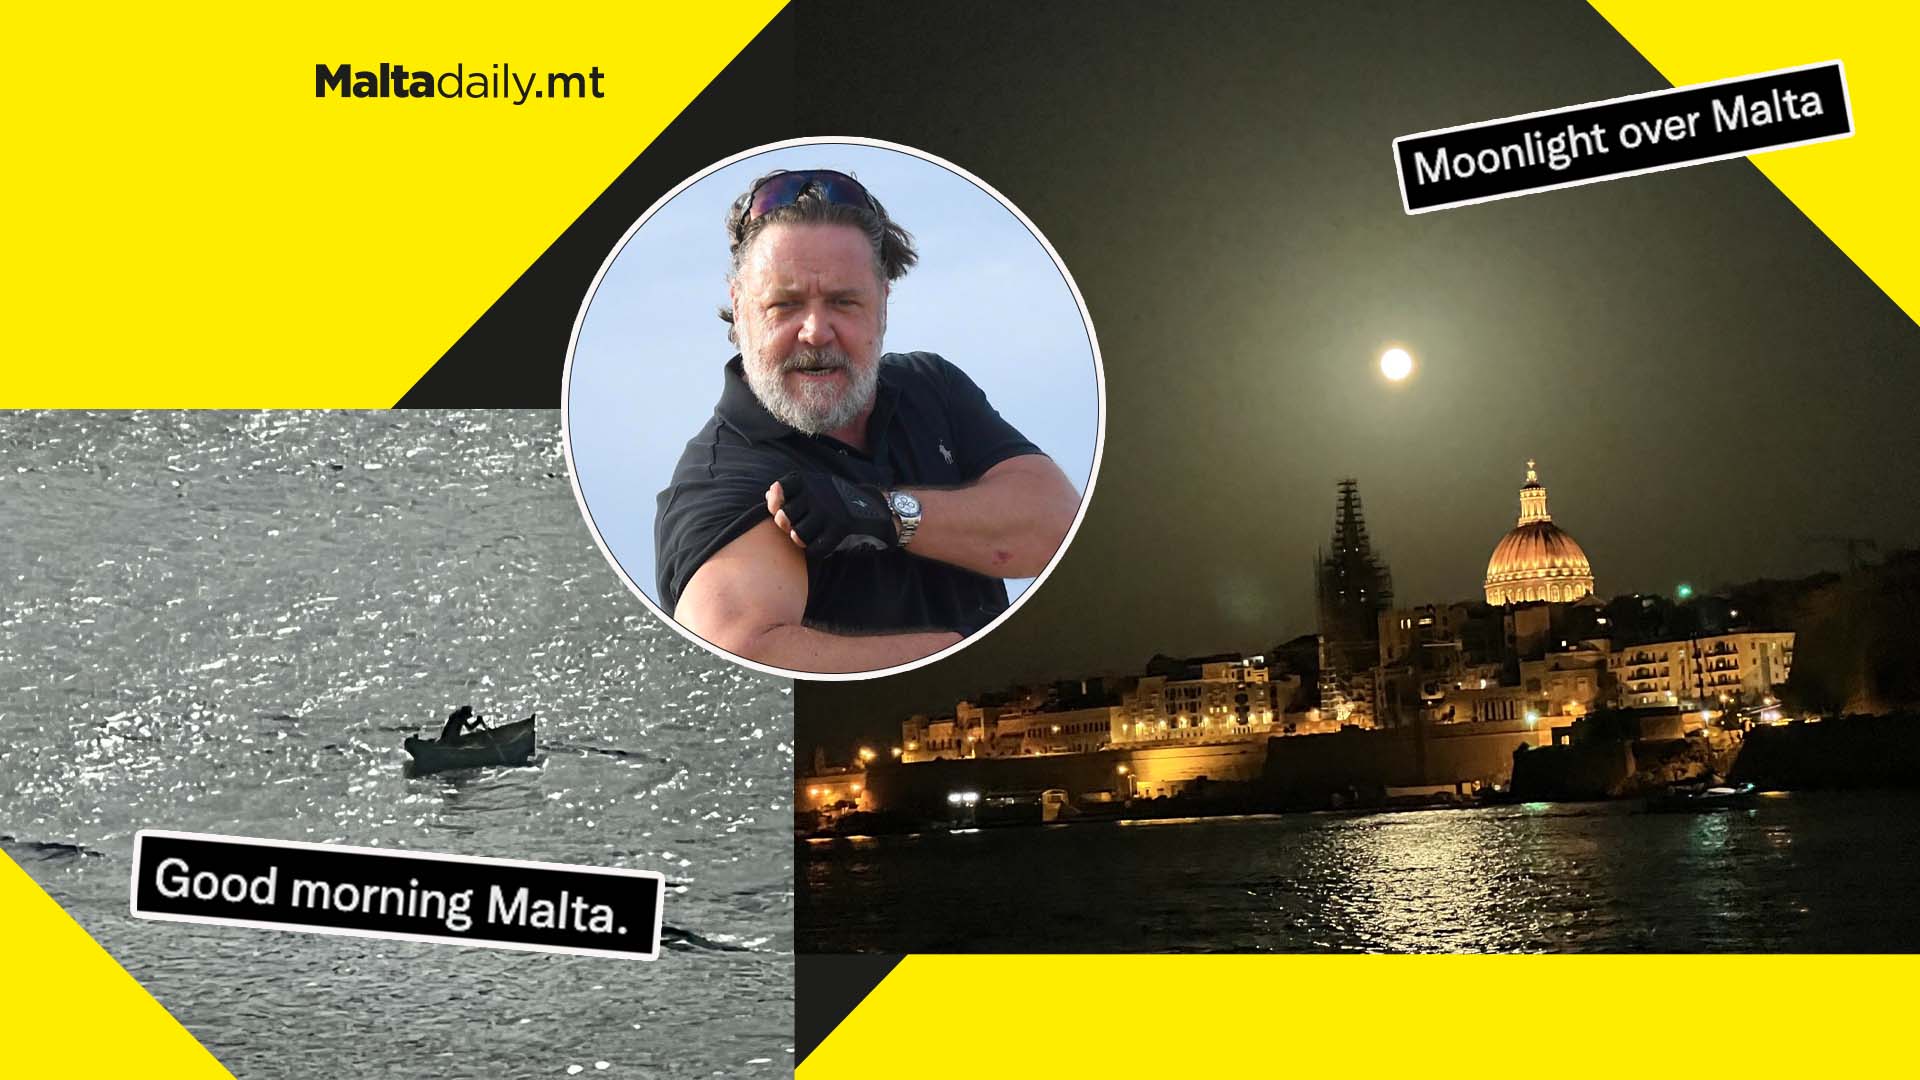 Here’s Russell Crowe absolutely loving his time in Malta